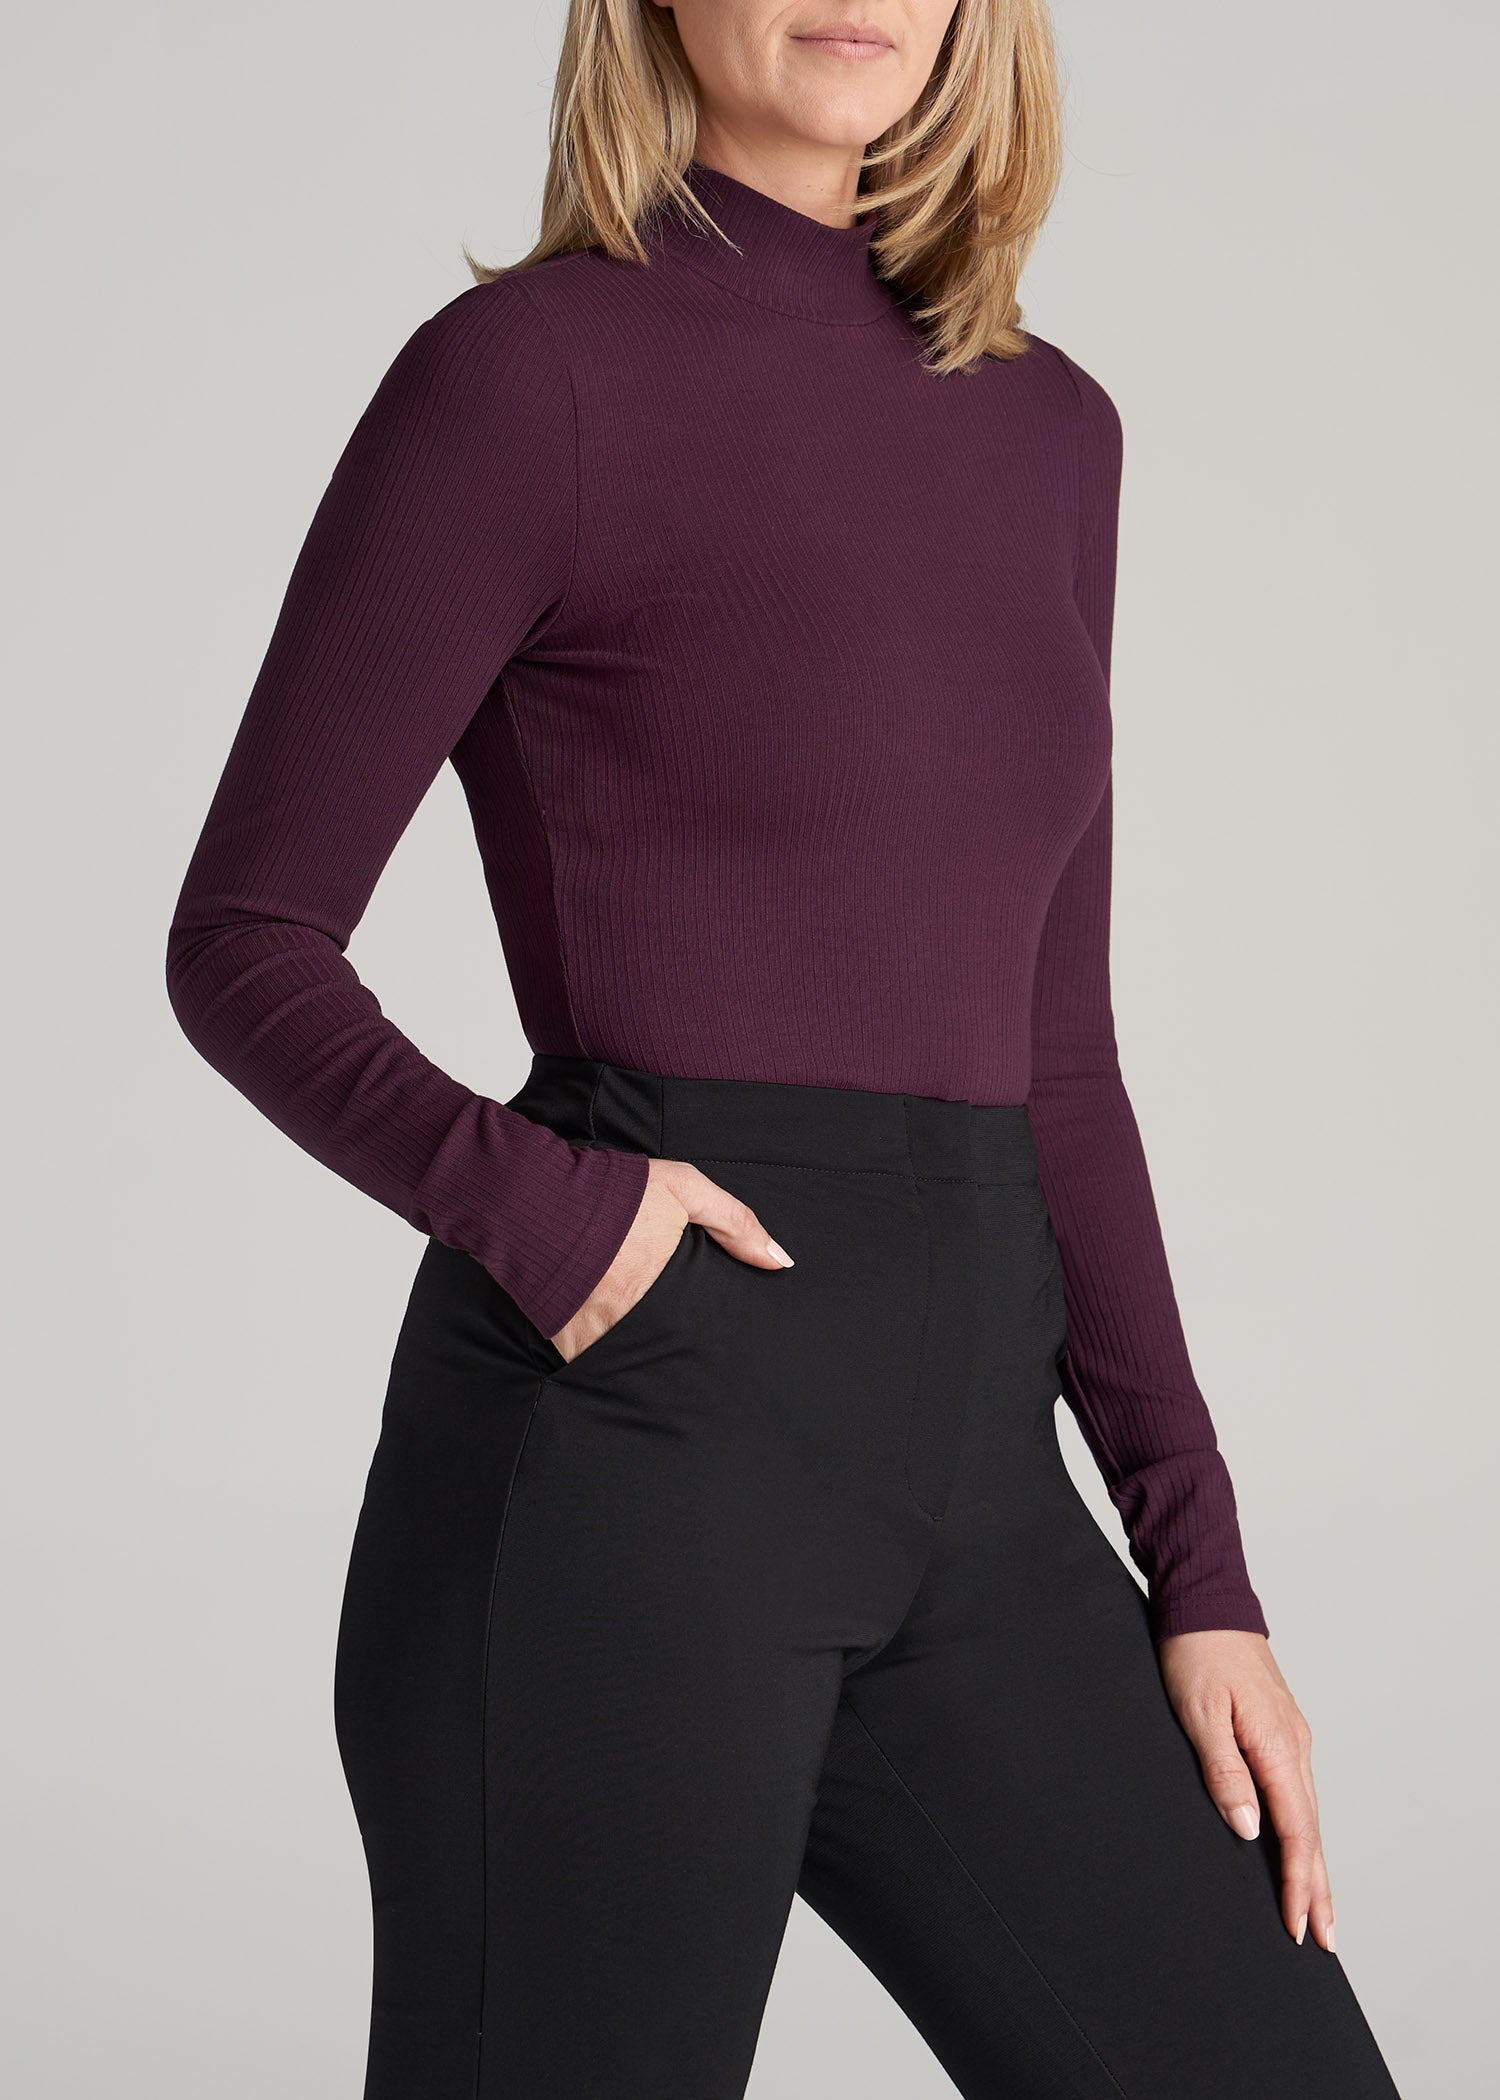       American-Tall-Women-LS-Mock-Neck-Ribbed-Top-Maroon-side